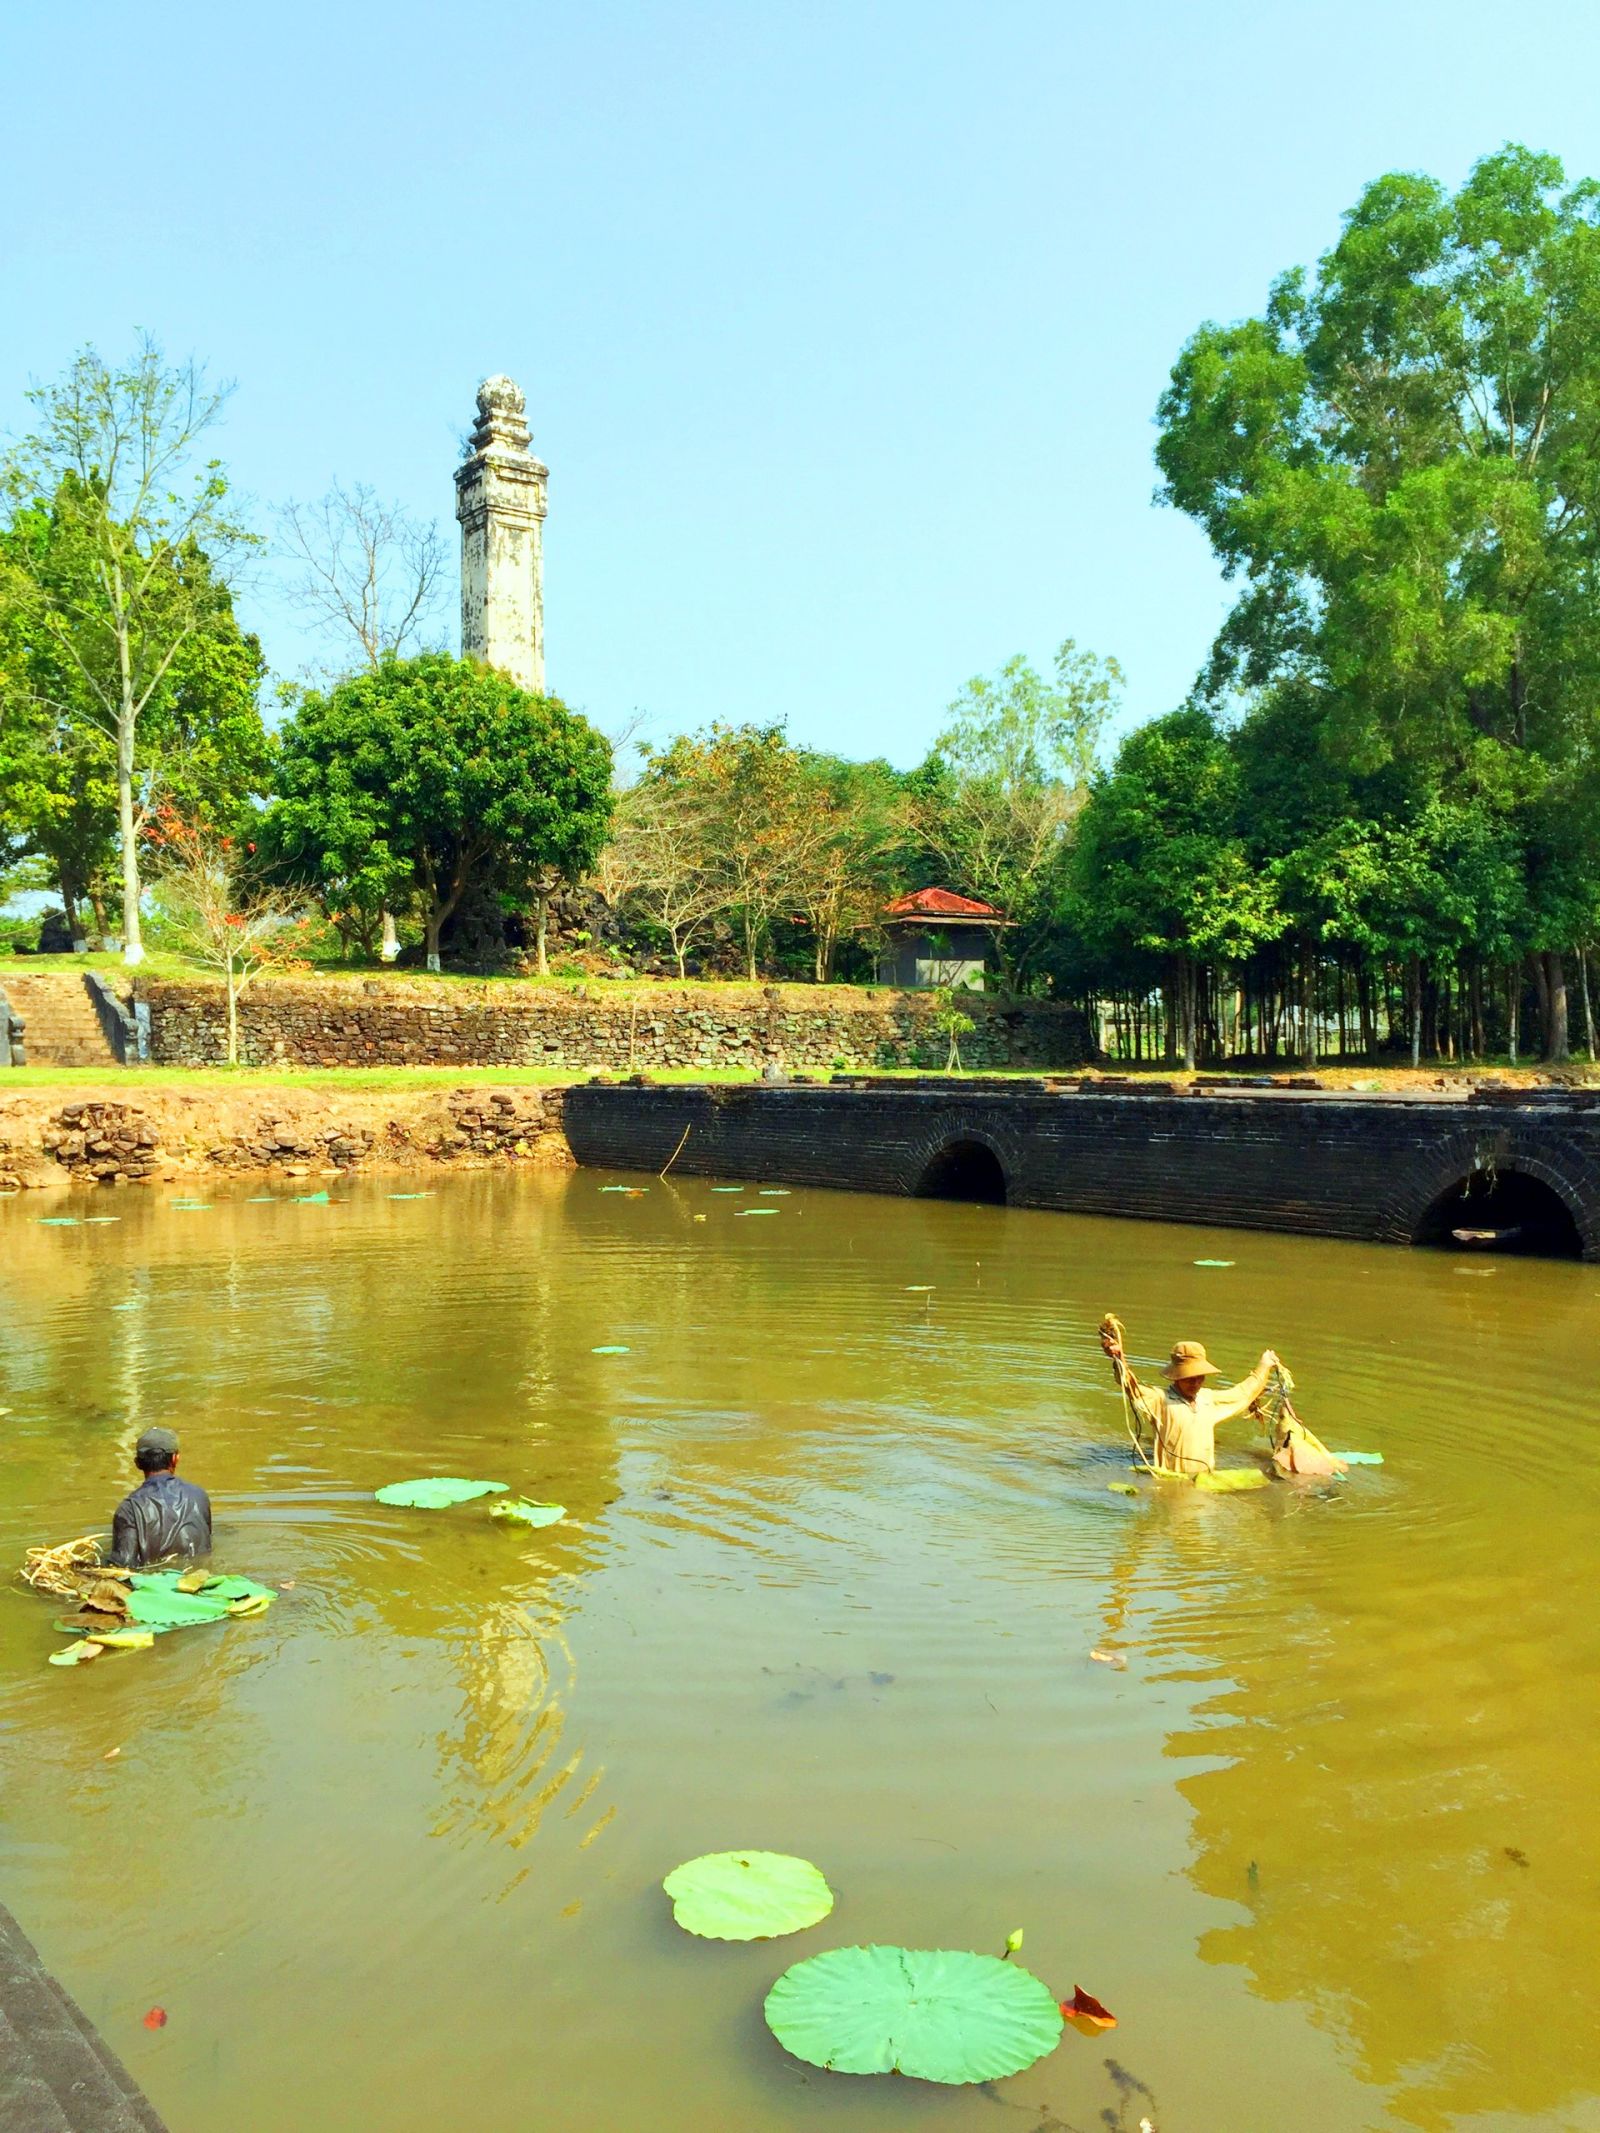 After An Hoa gate, the lake at Thieu Tri tomb was also planted with lotus. In its blooming season, the lotus will create more impression to the landscape here